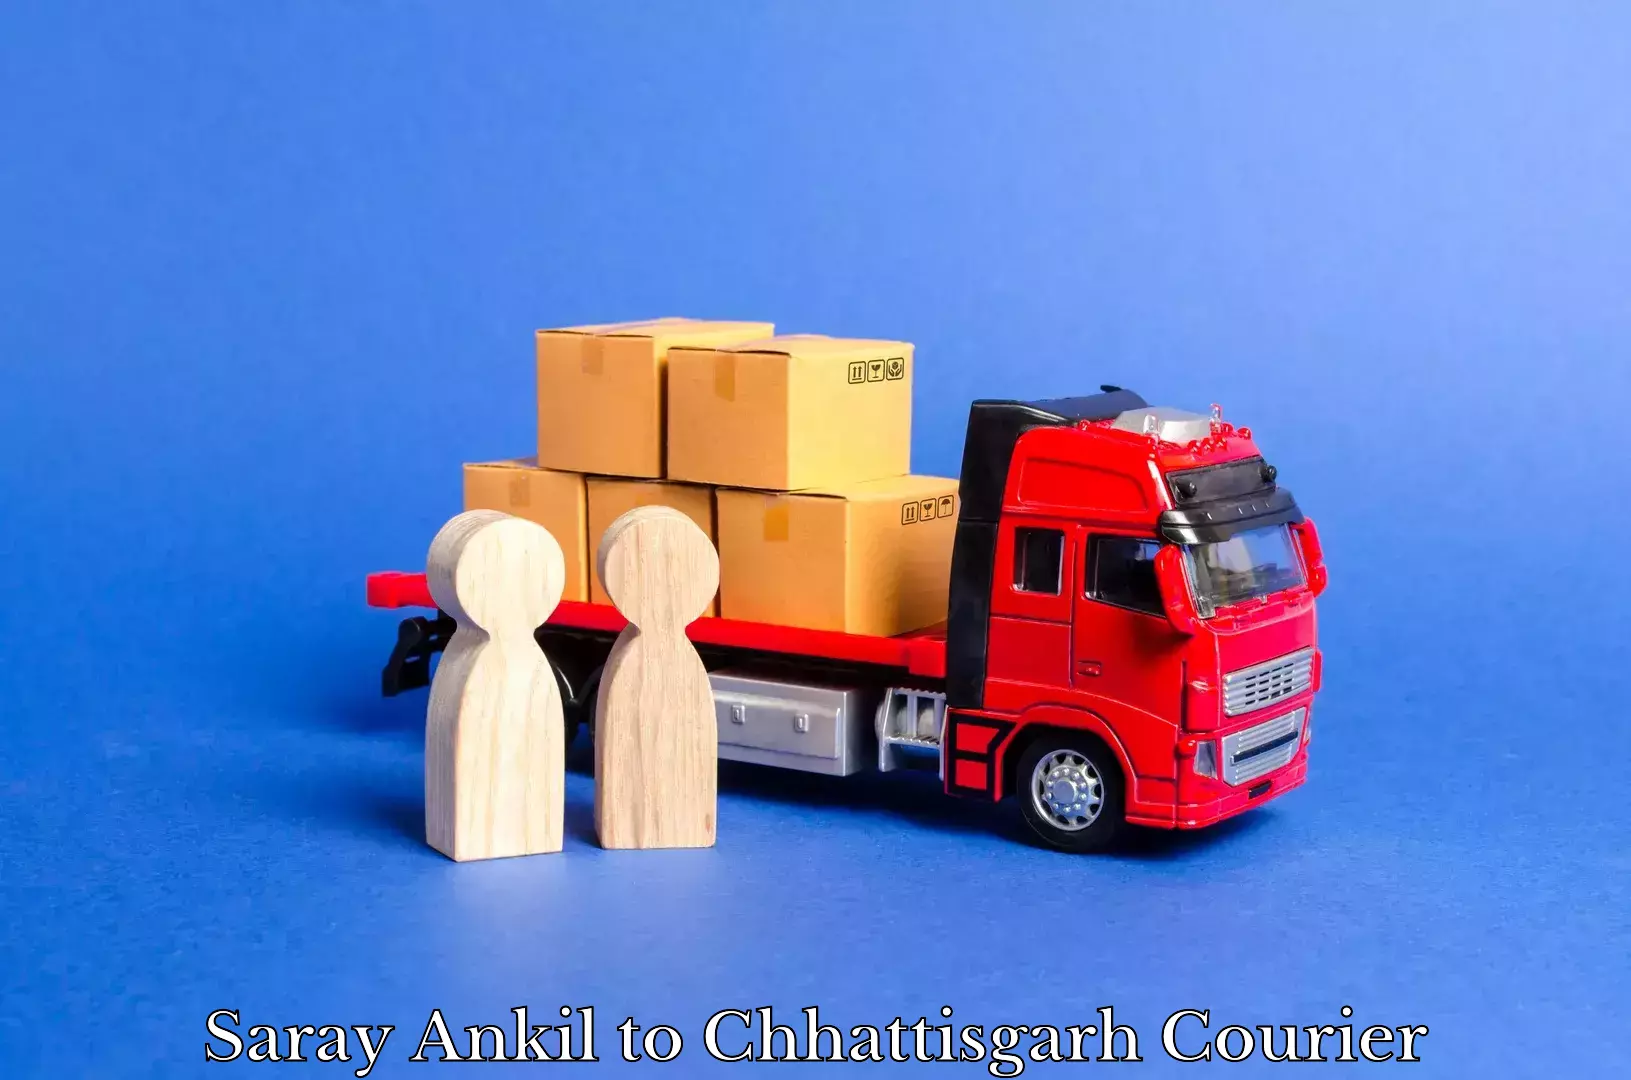 Cost-effective courier options Saray Ankil to Chhattisgarh